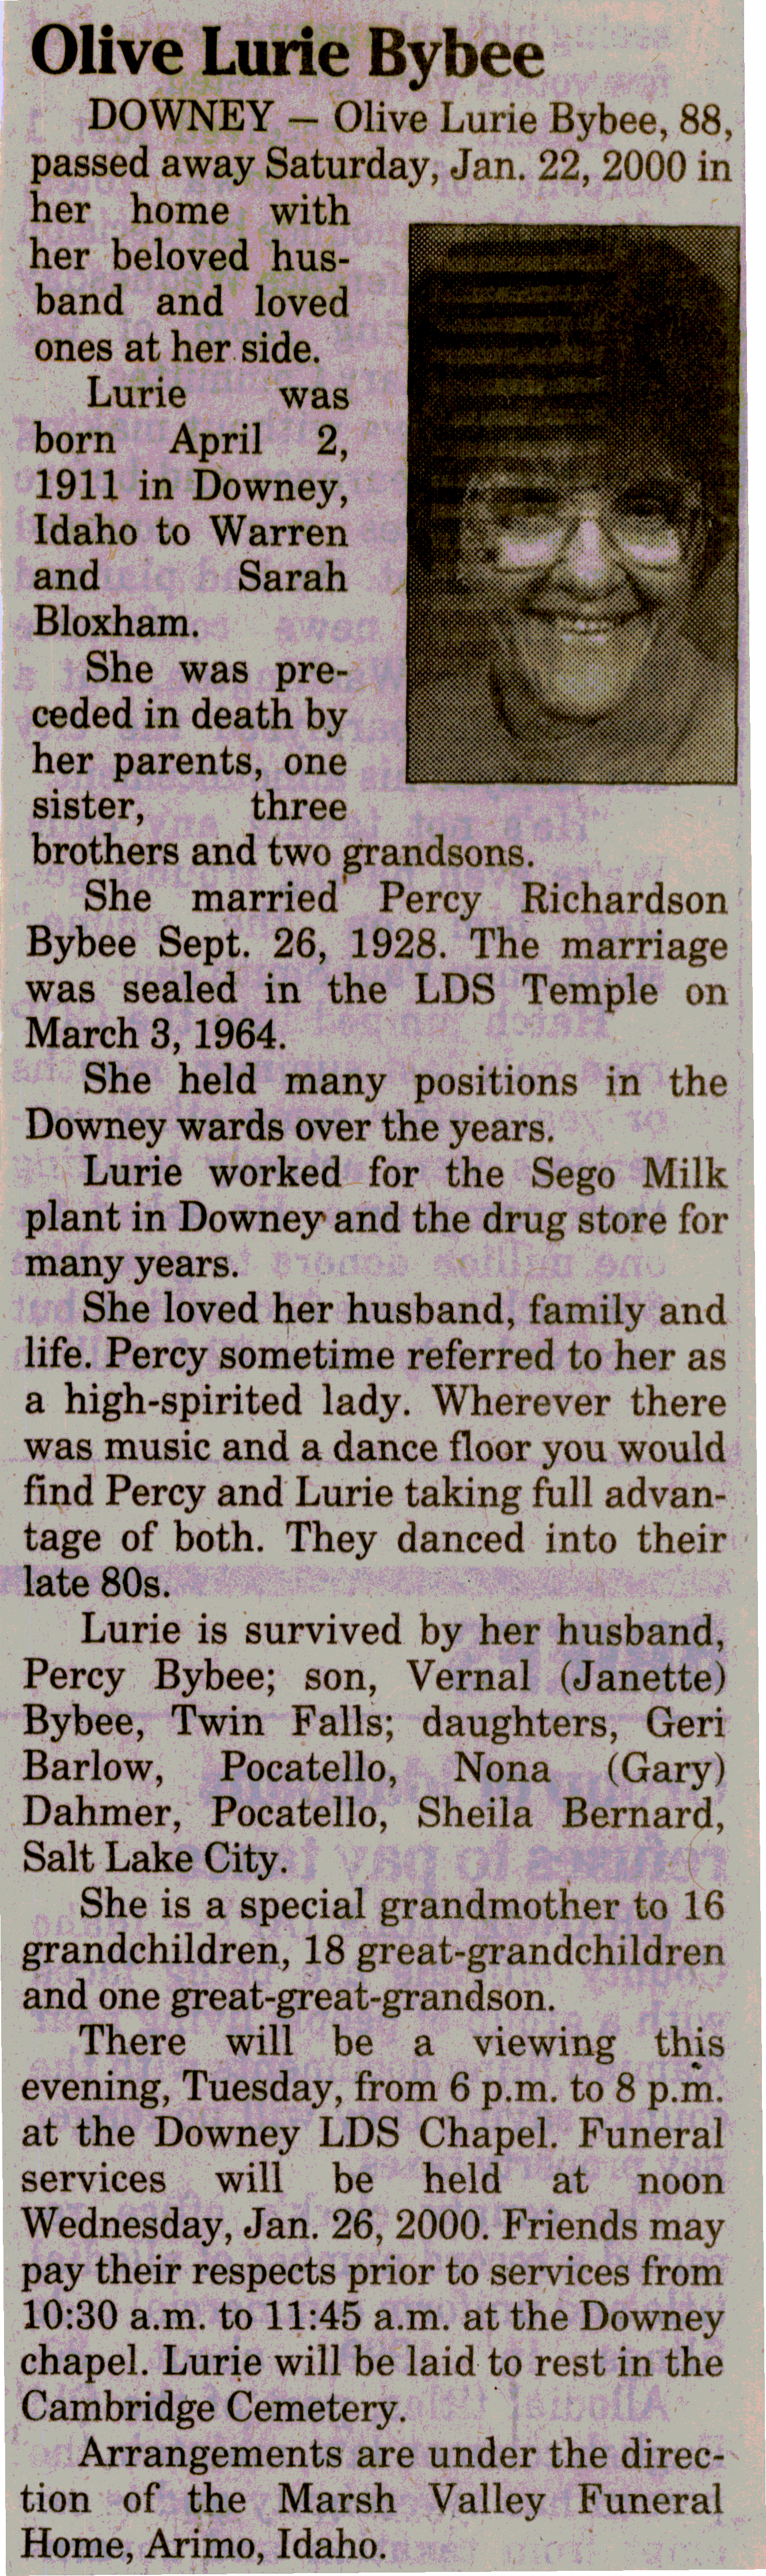 Olive Lurie Bybee obit